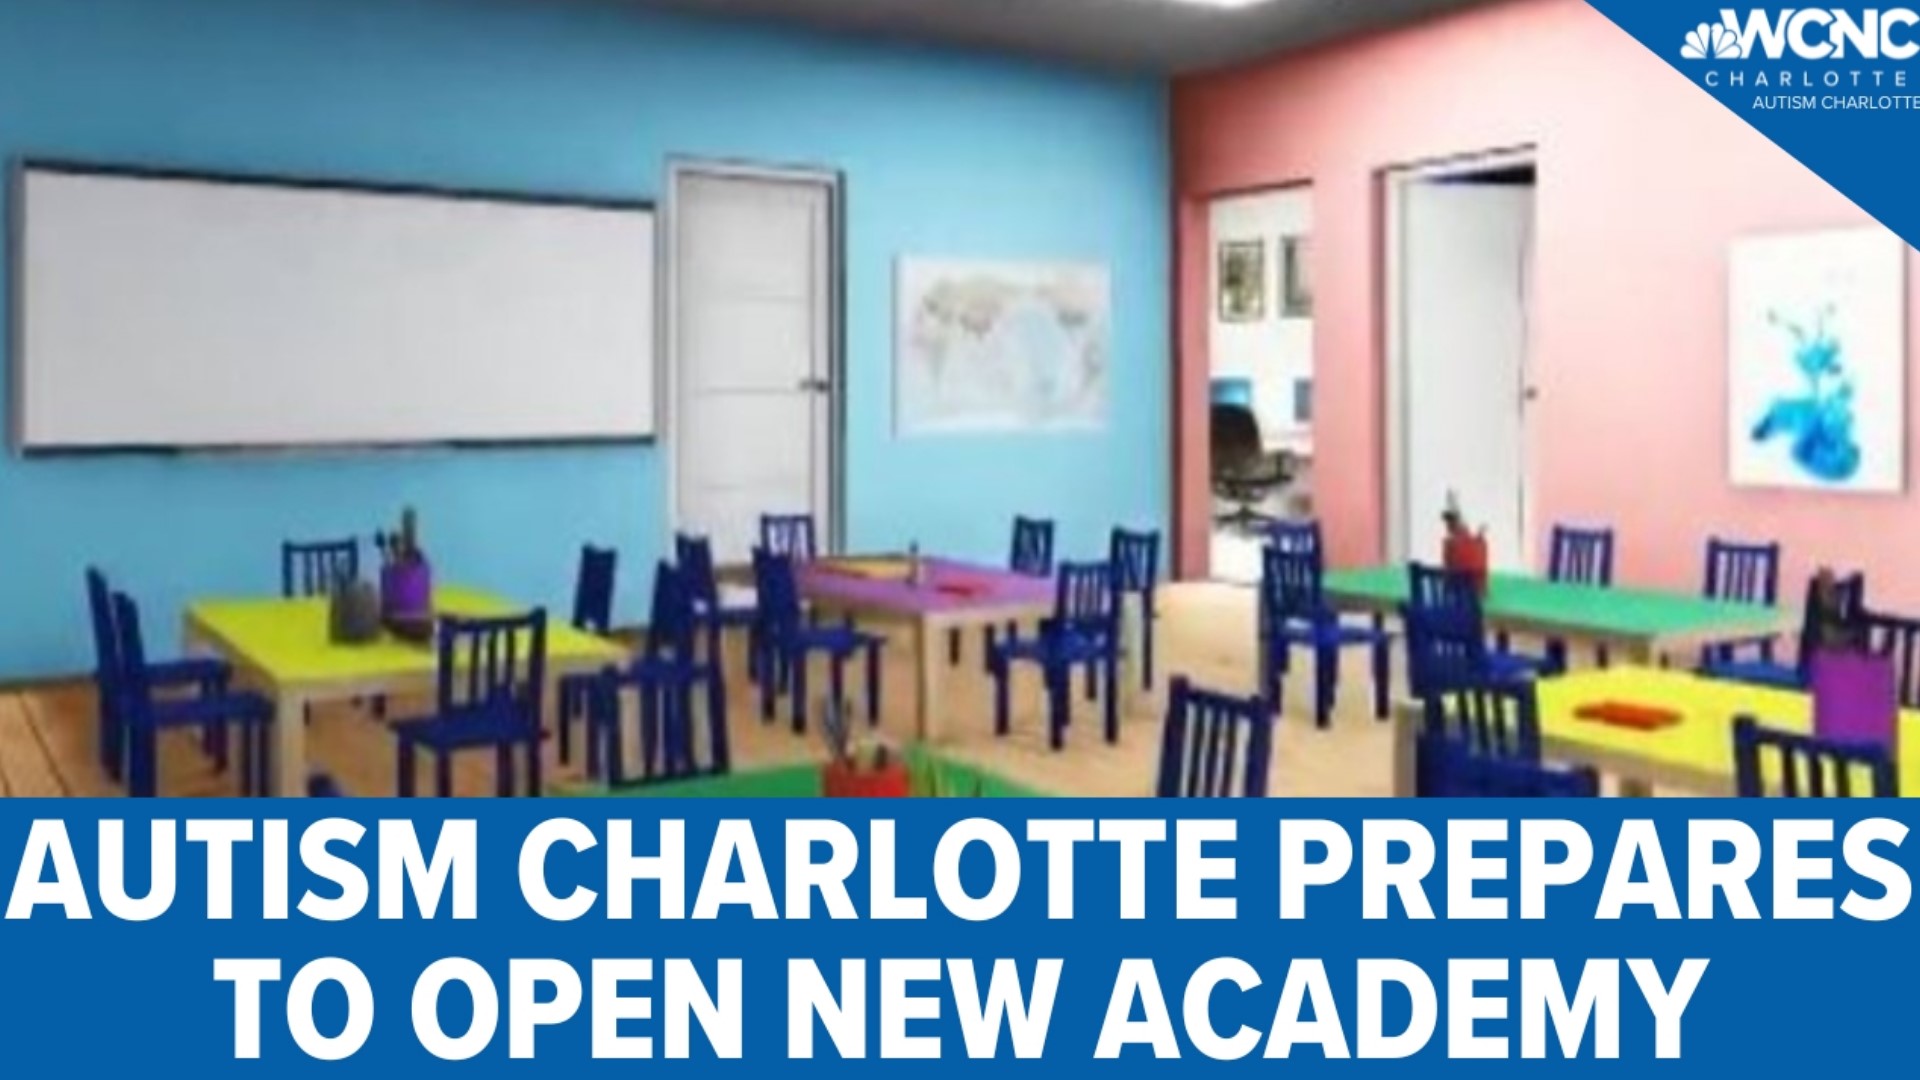 The Academy for Students with Autism plans to officially open in early 2023